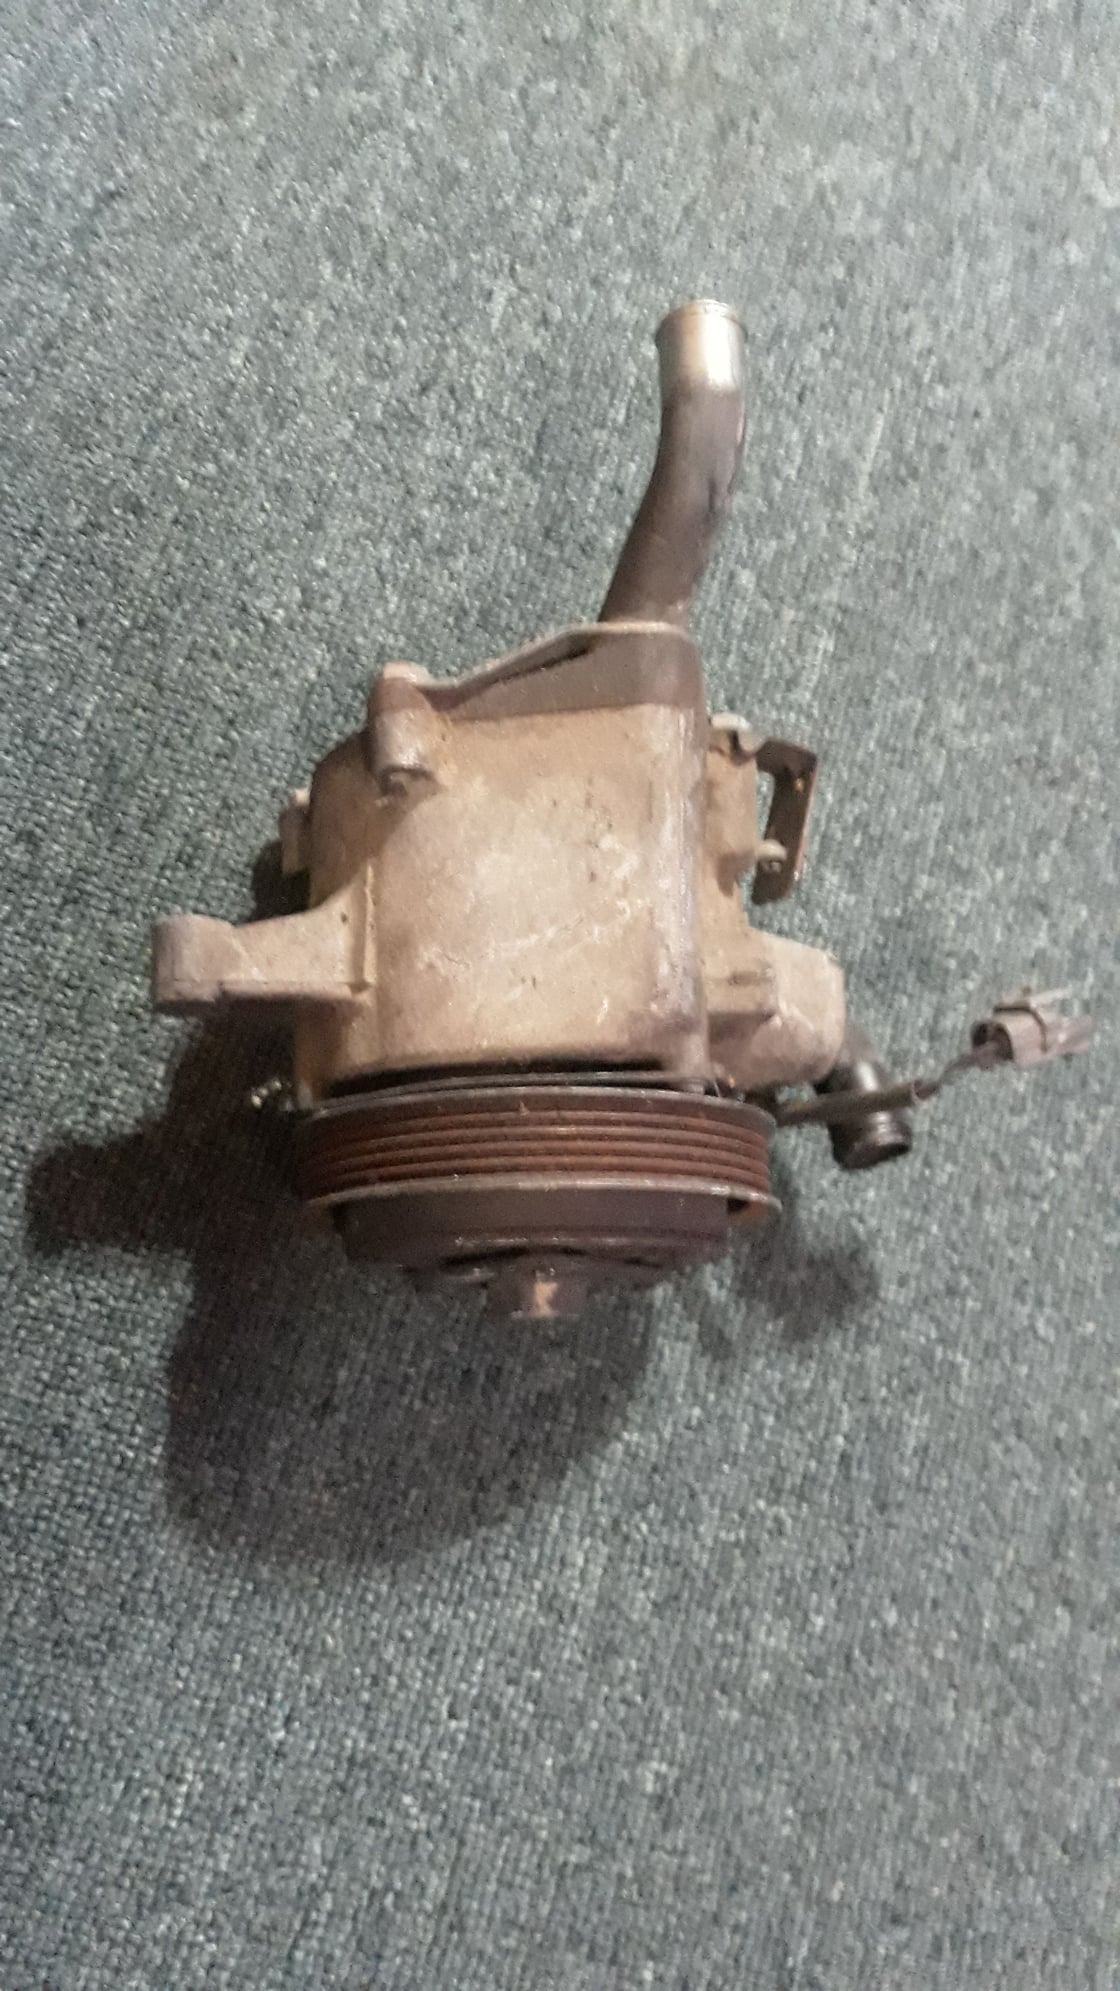 Miscellaneous - OEM Air Pump - Used - 1993 to 1995 Mazda RX-7 - Orlando, FL 32824, United States